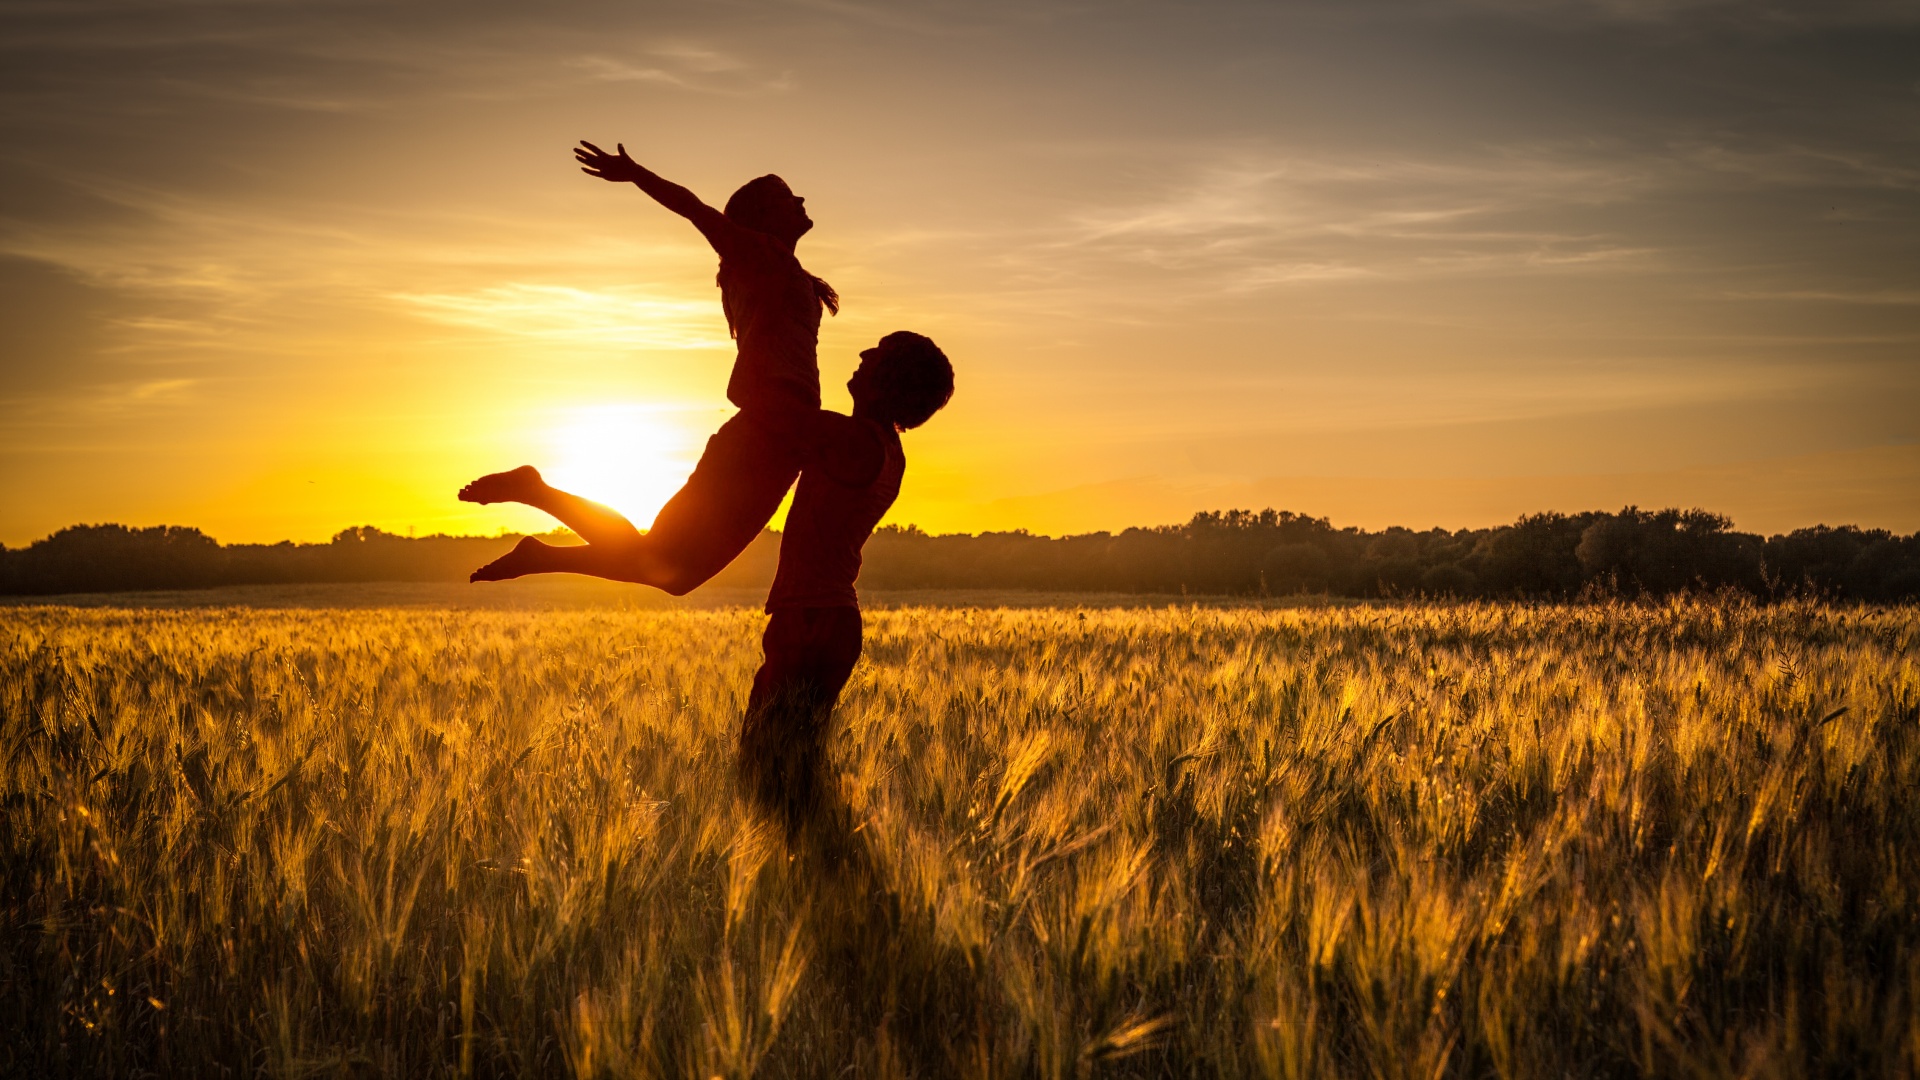 Couple 4K Wallpaper, Silhouette, Sunset, Romantic, Together, Evening